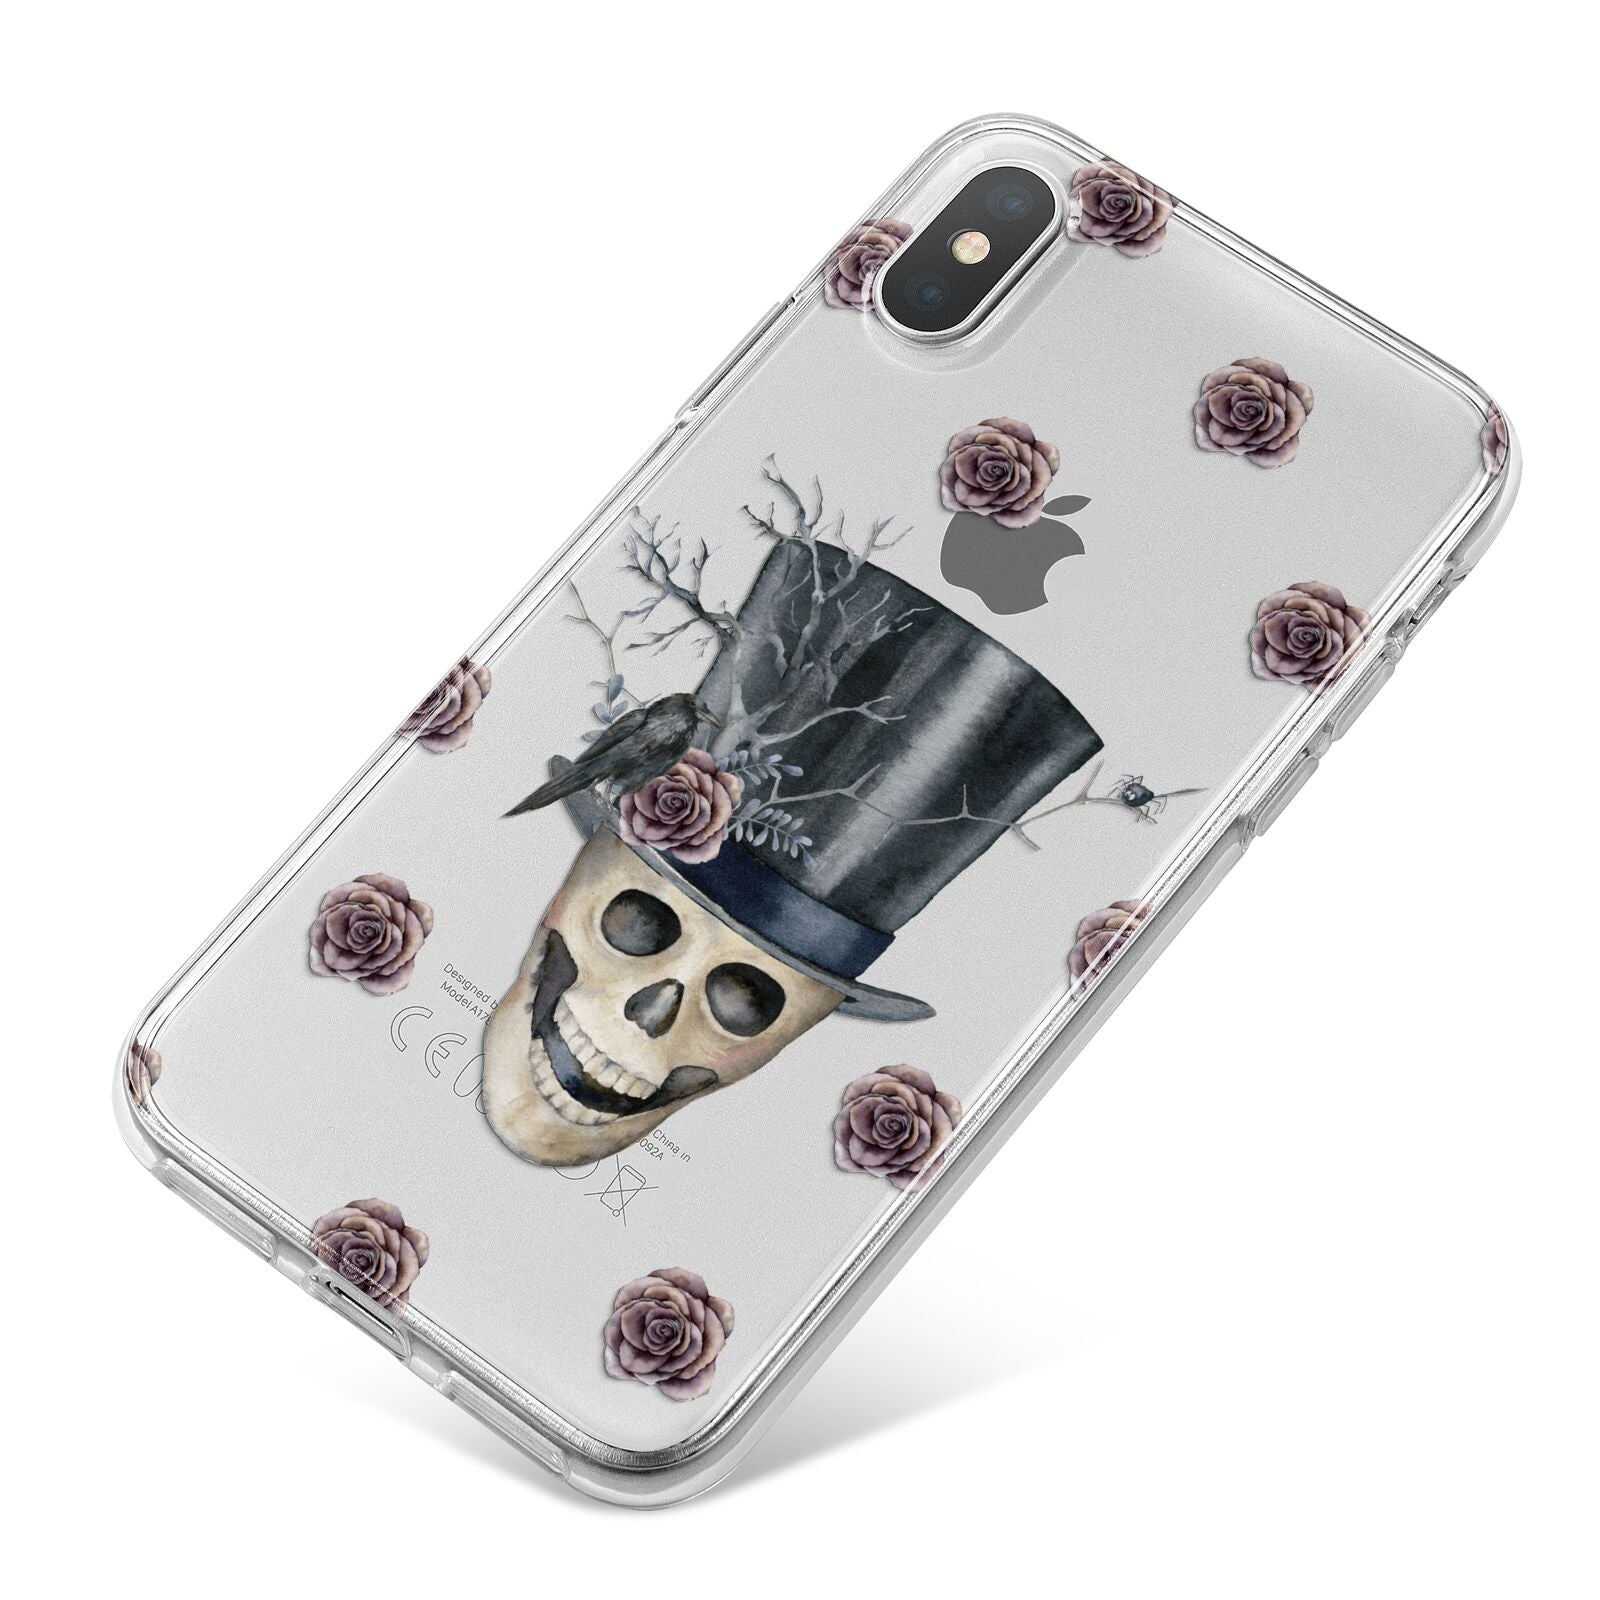 Top Hat Skull iPhone X Bumper Case on Silver iPhone